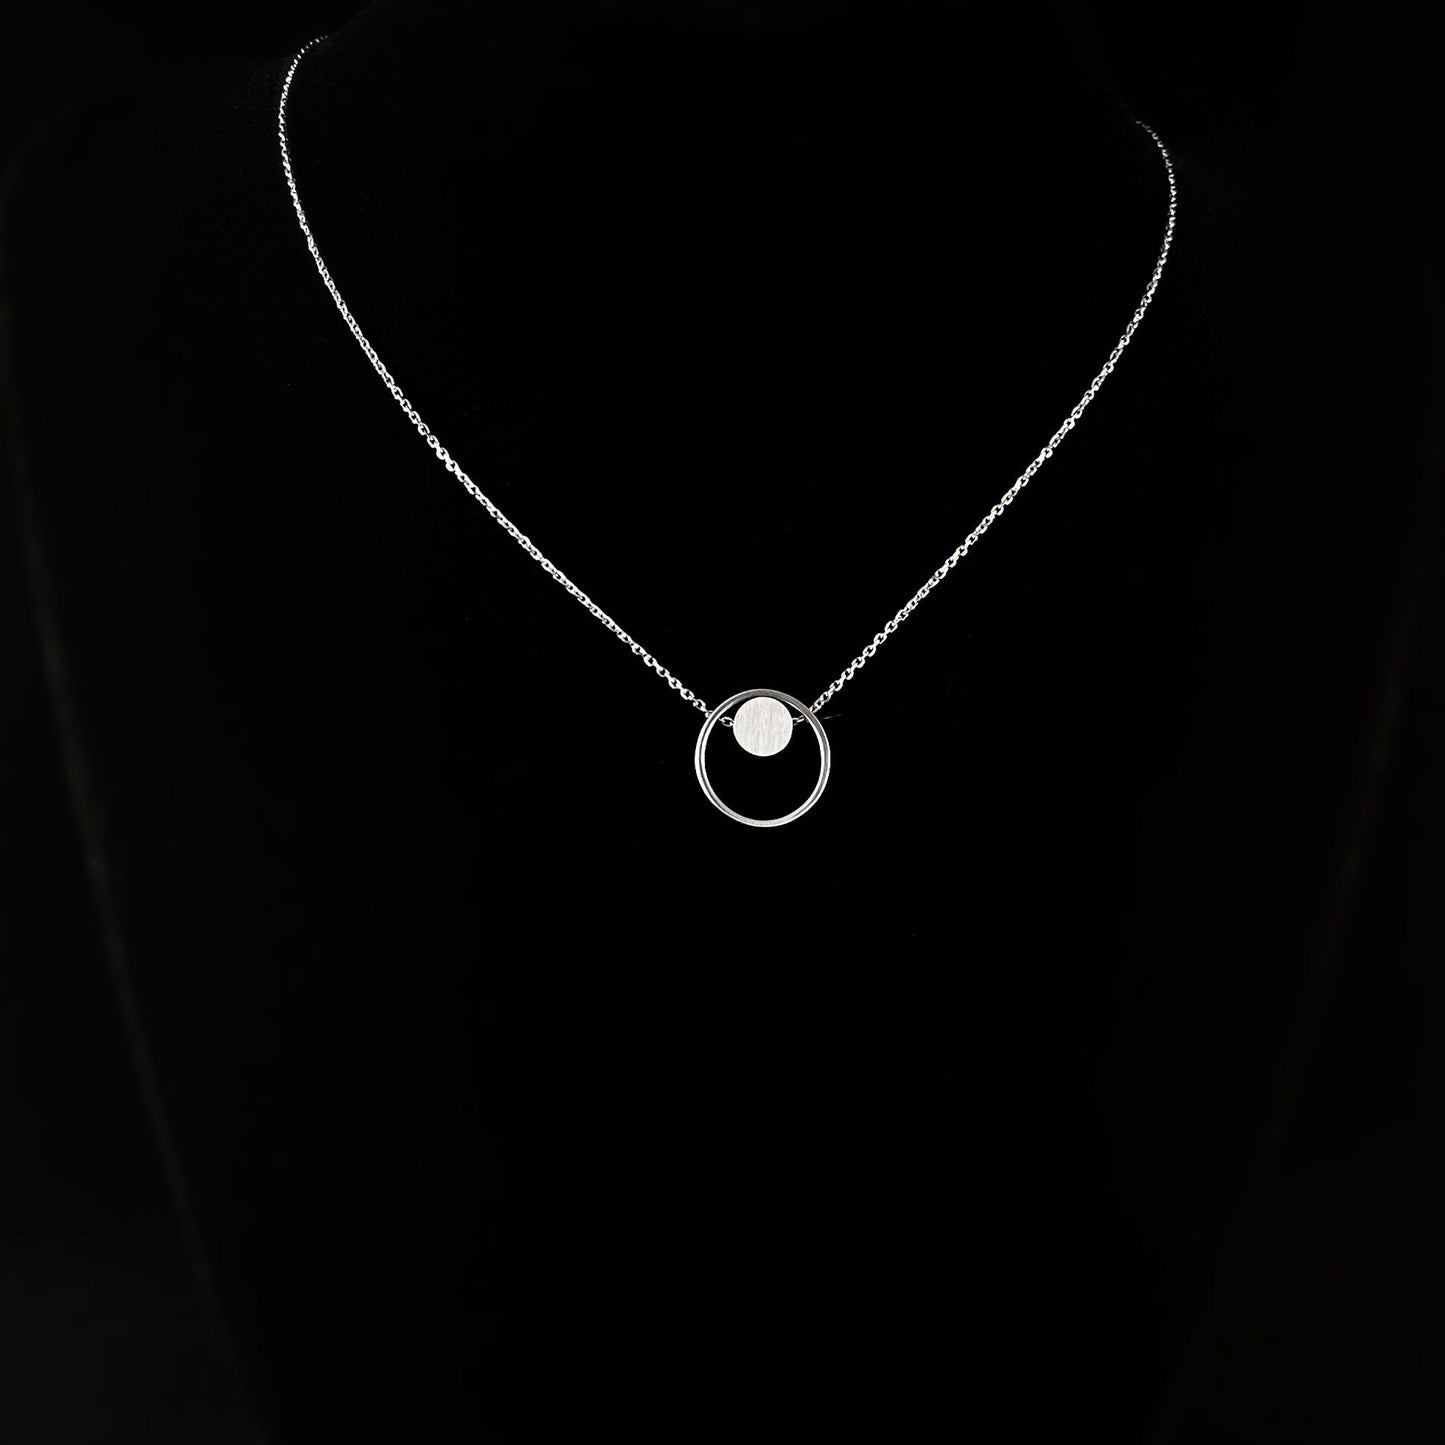 Dainty Silver Moonglow Pendant Necklace - Sabrina